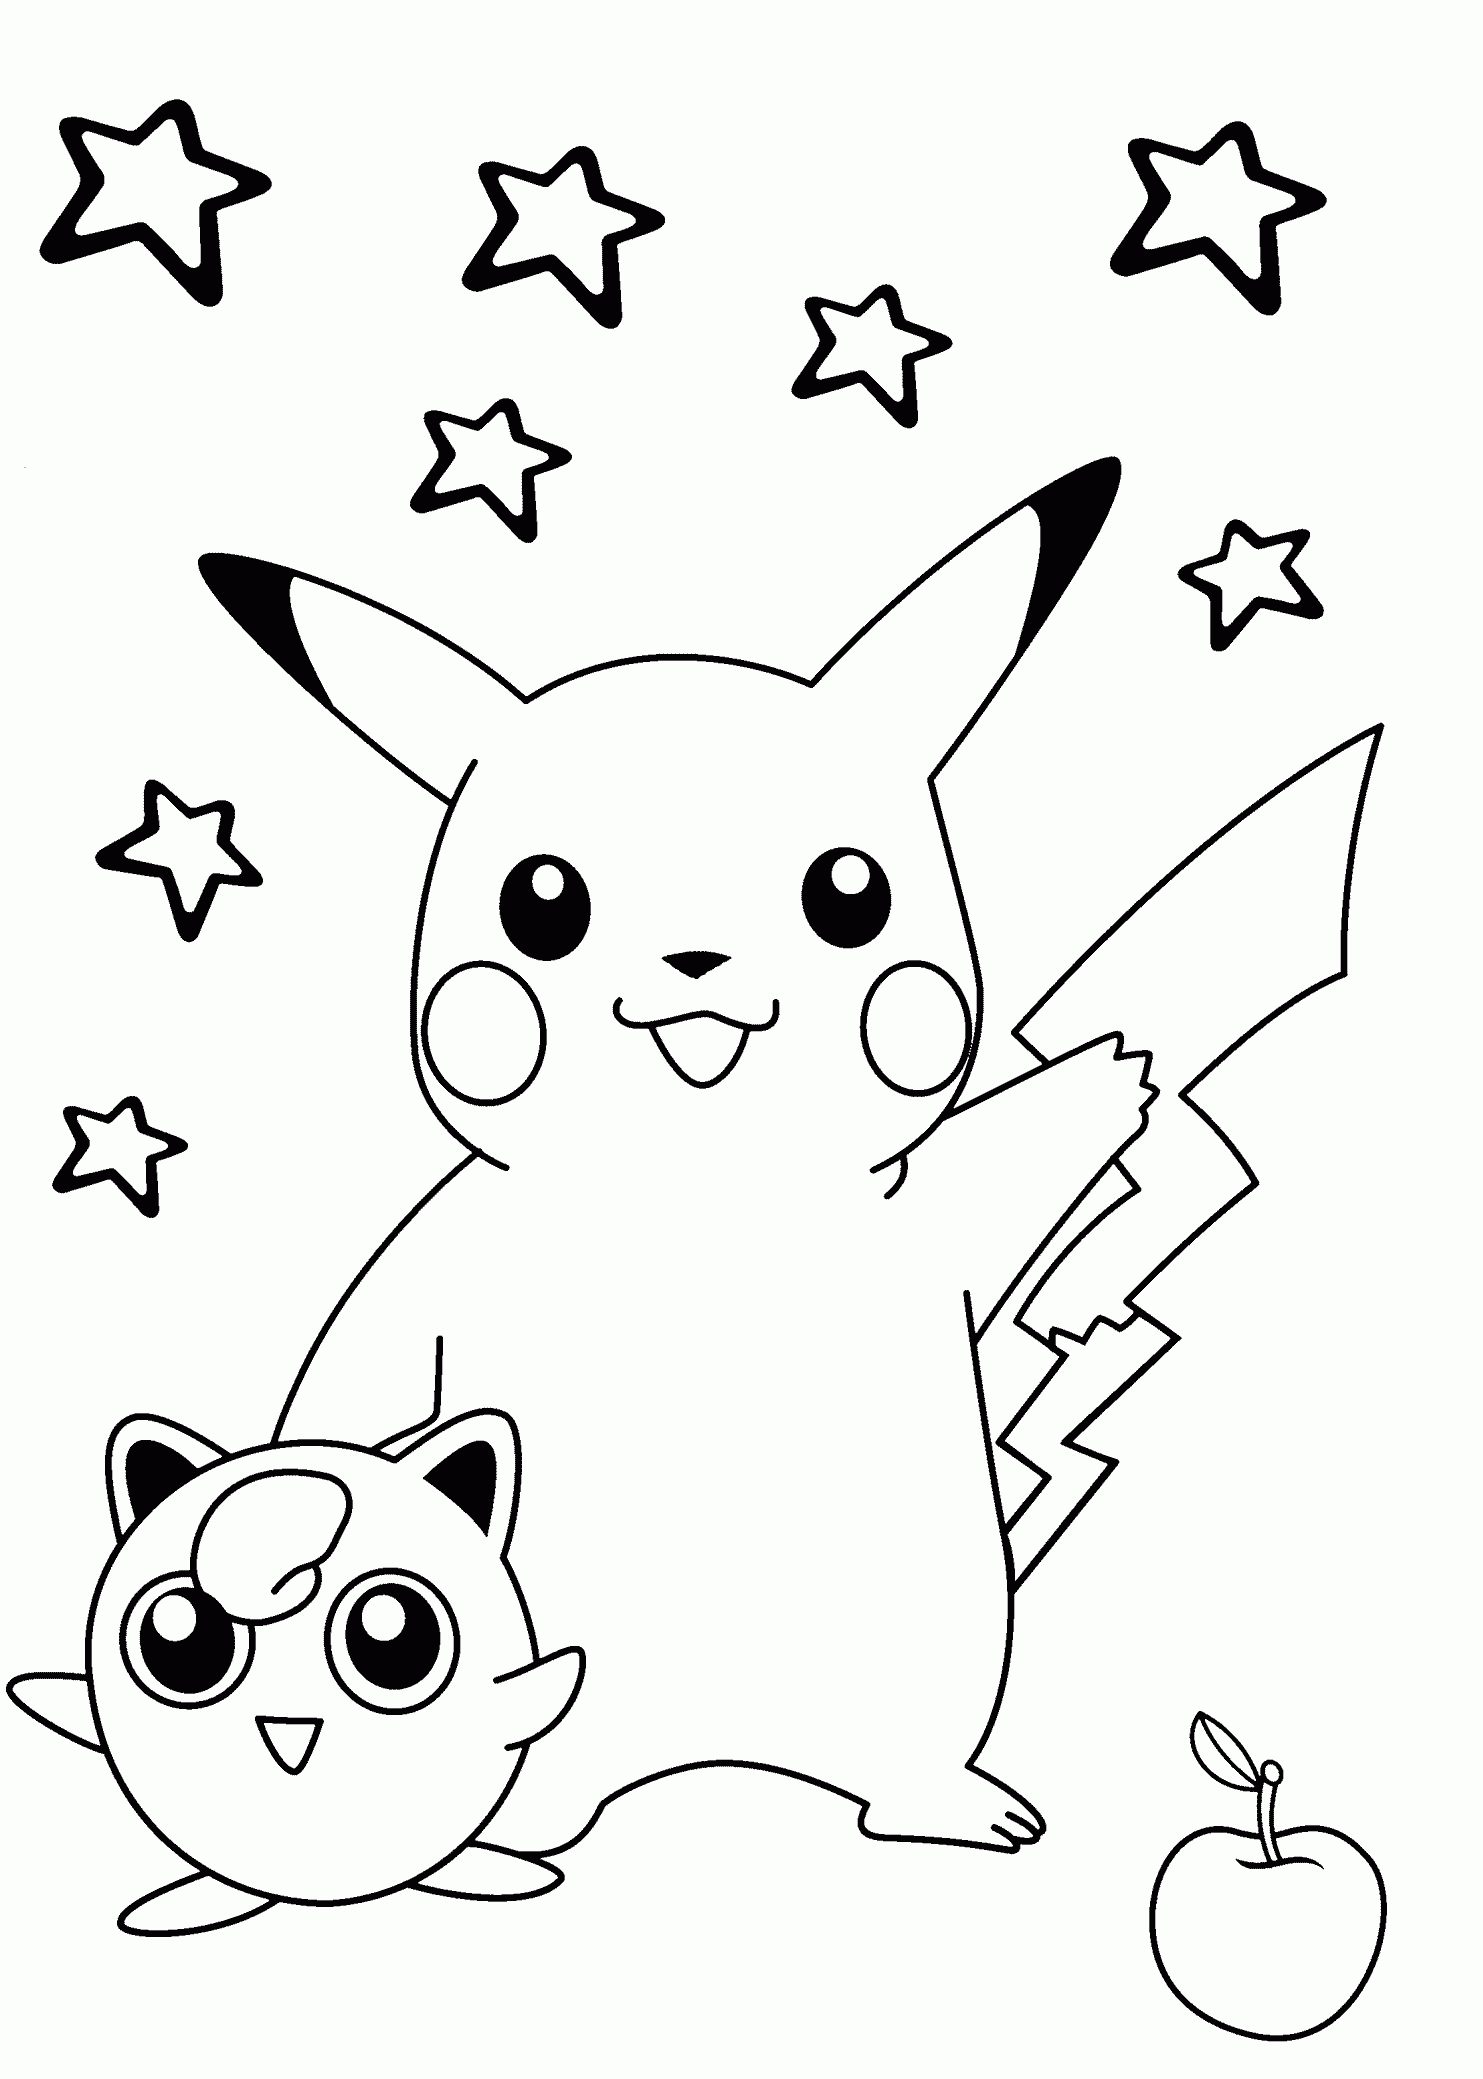 Smiling Pokemon Coloring Pages For Kids, Printable Free | Coloring - Free Printable Coloring Pages For Kids